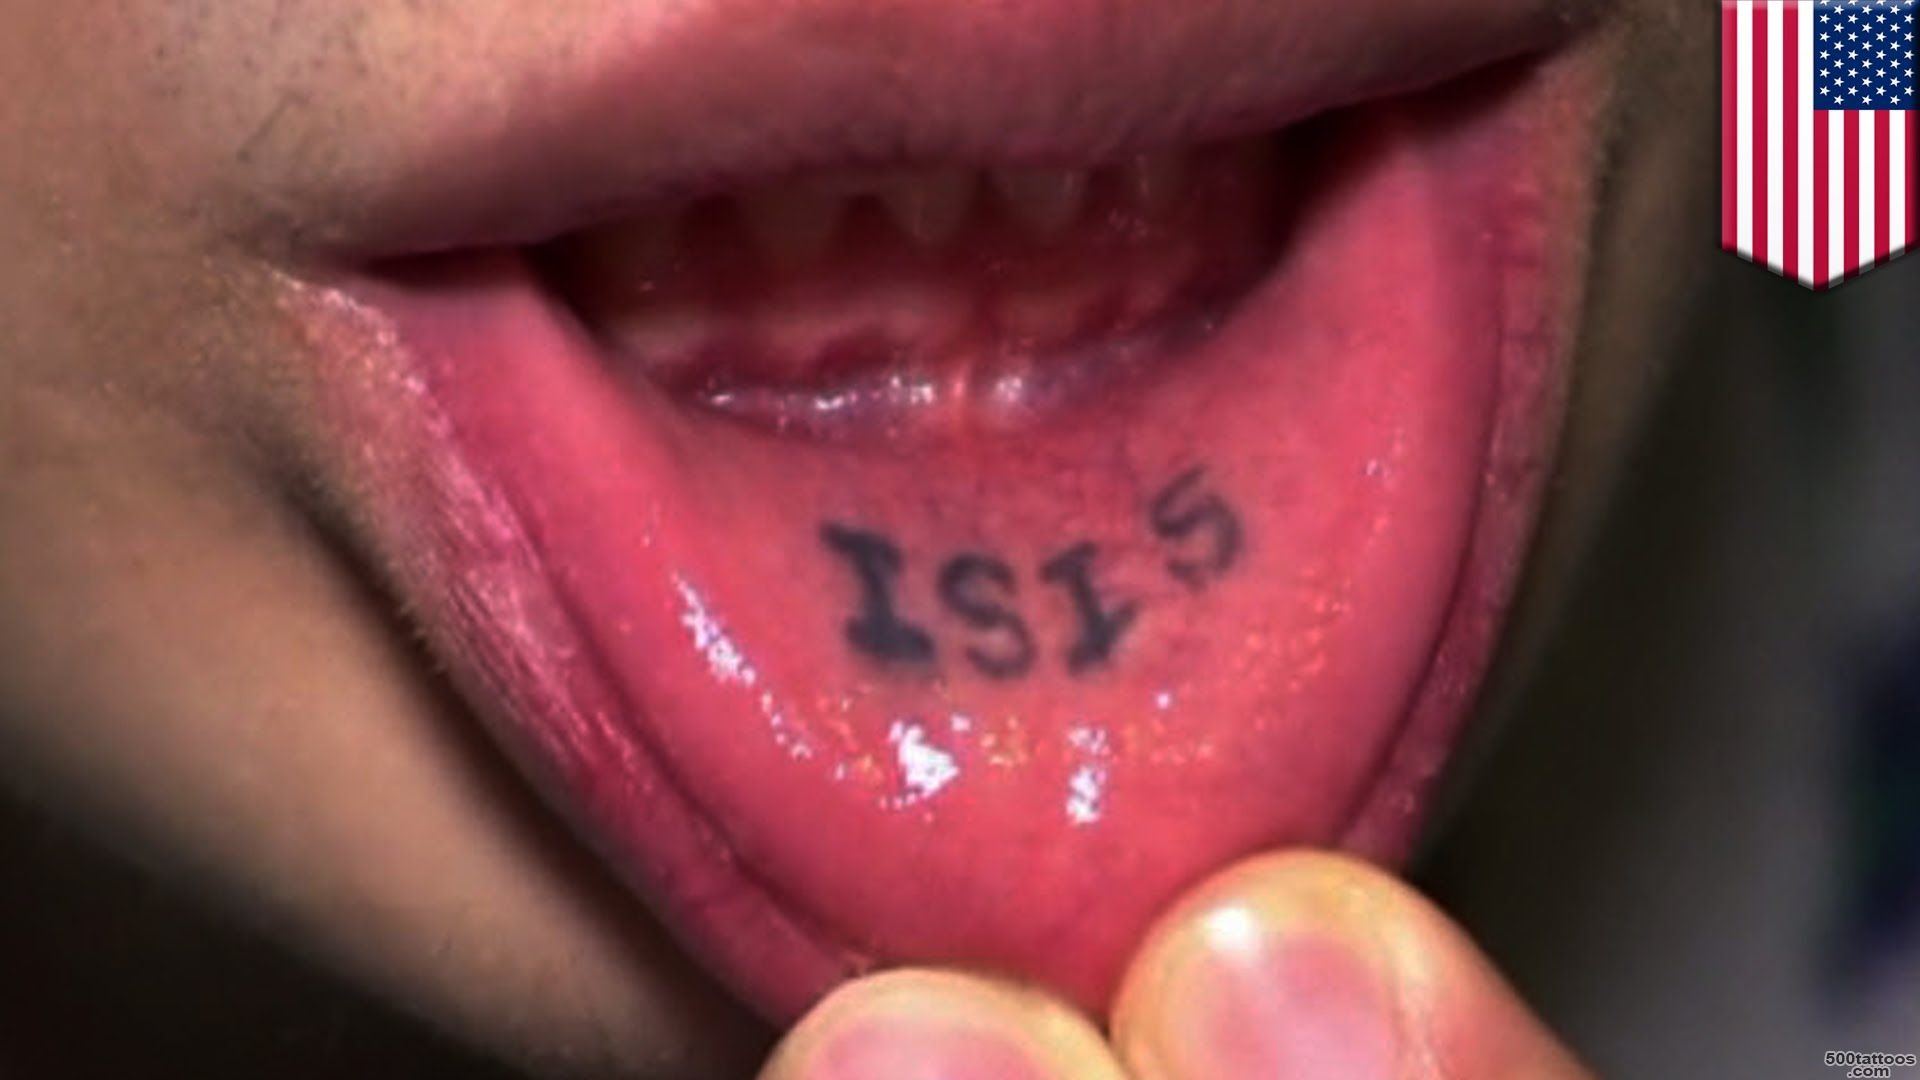 ISIS lip tattoo Home Depot employee fired after showing off inner ..._8